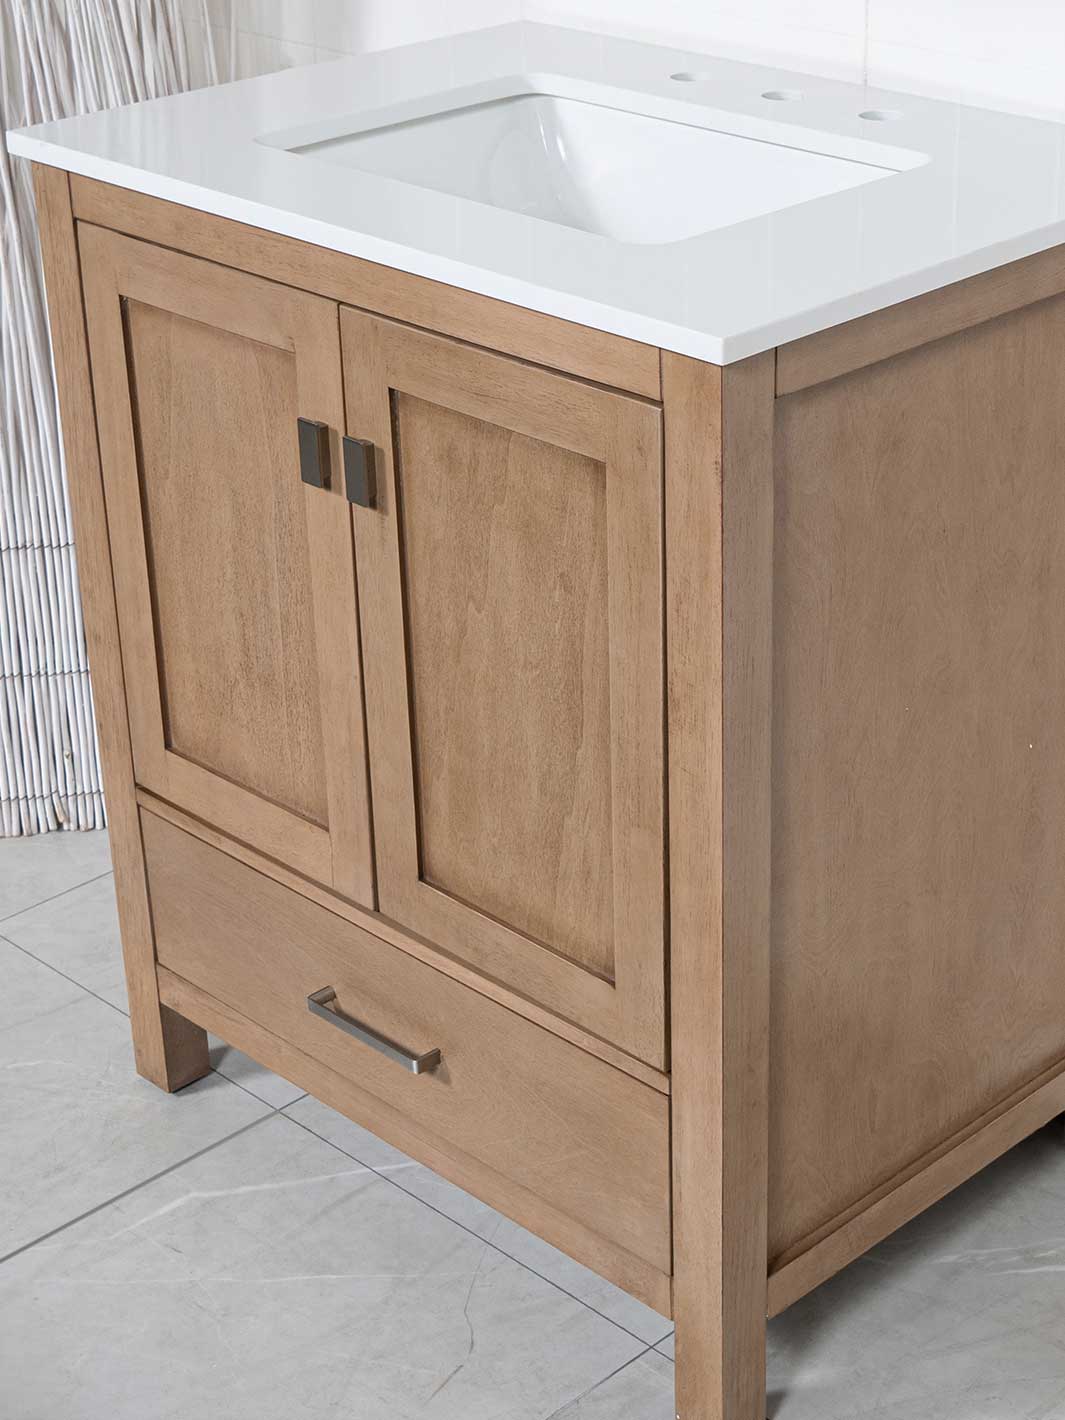 30 inch vanity wood veneer finish with white quartz counter with attached undermount sink